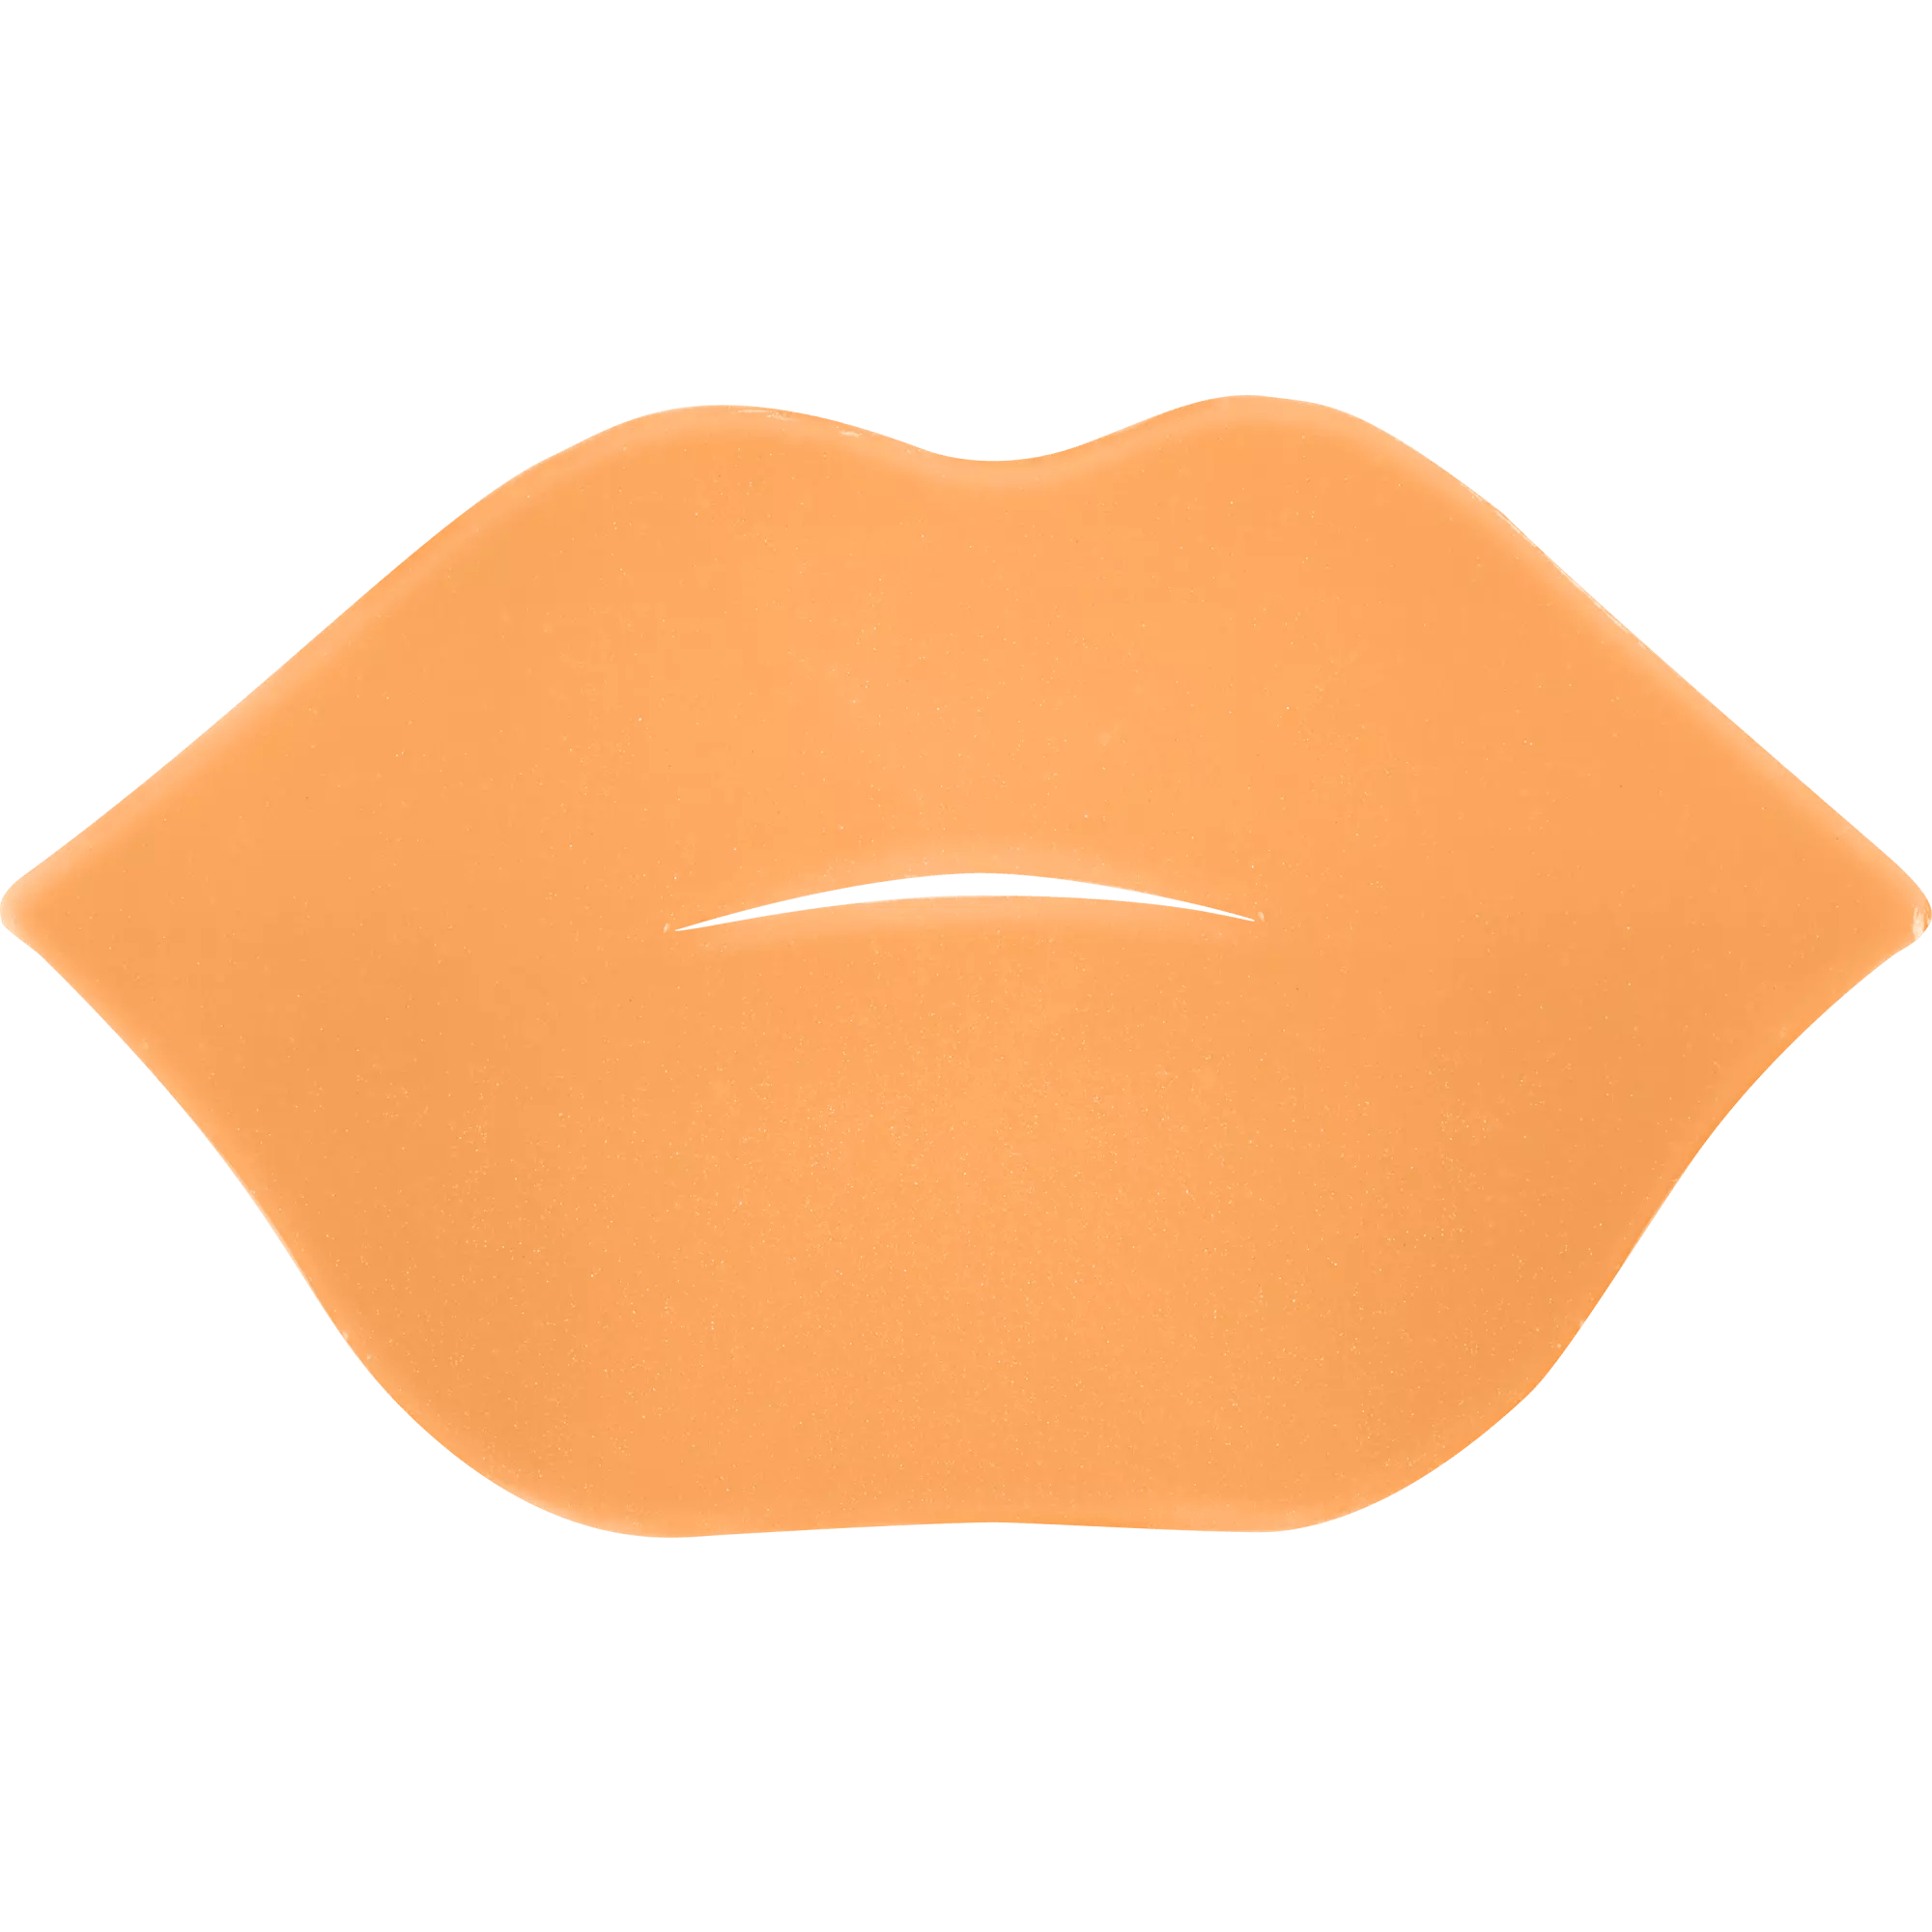 Essence Pumpkins pretty please Smoothing Lip Patch-01 Ther A New Patch - AllurebeautypkEssence Pumpkins pretty please Smoothing Lip Patch-01 Ther A New Patch